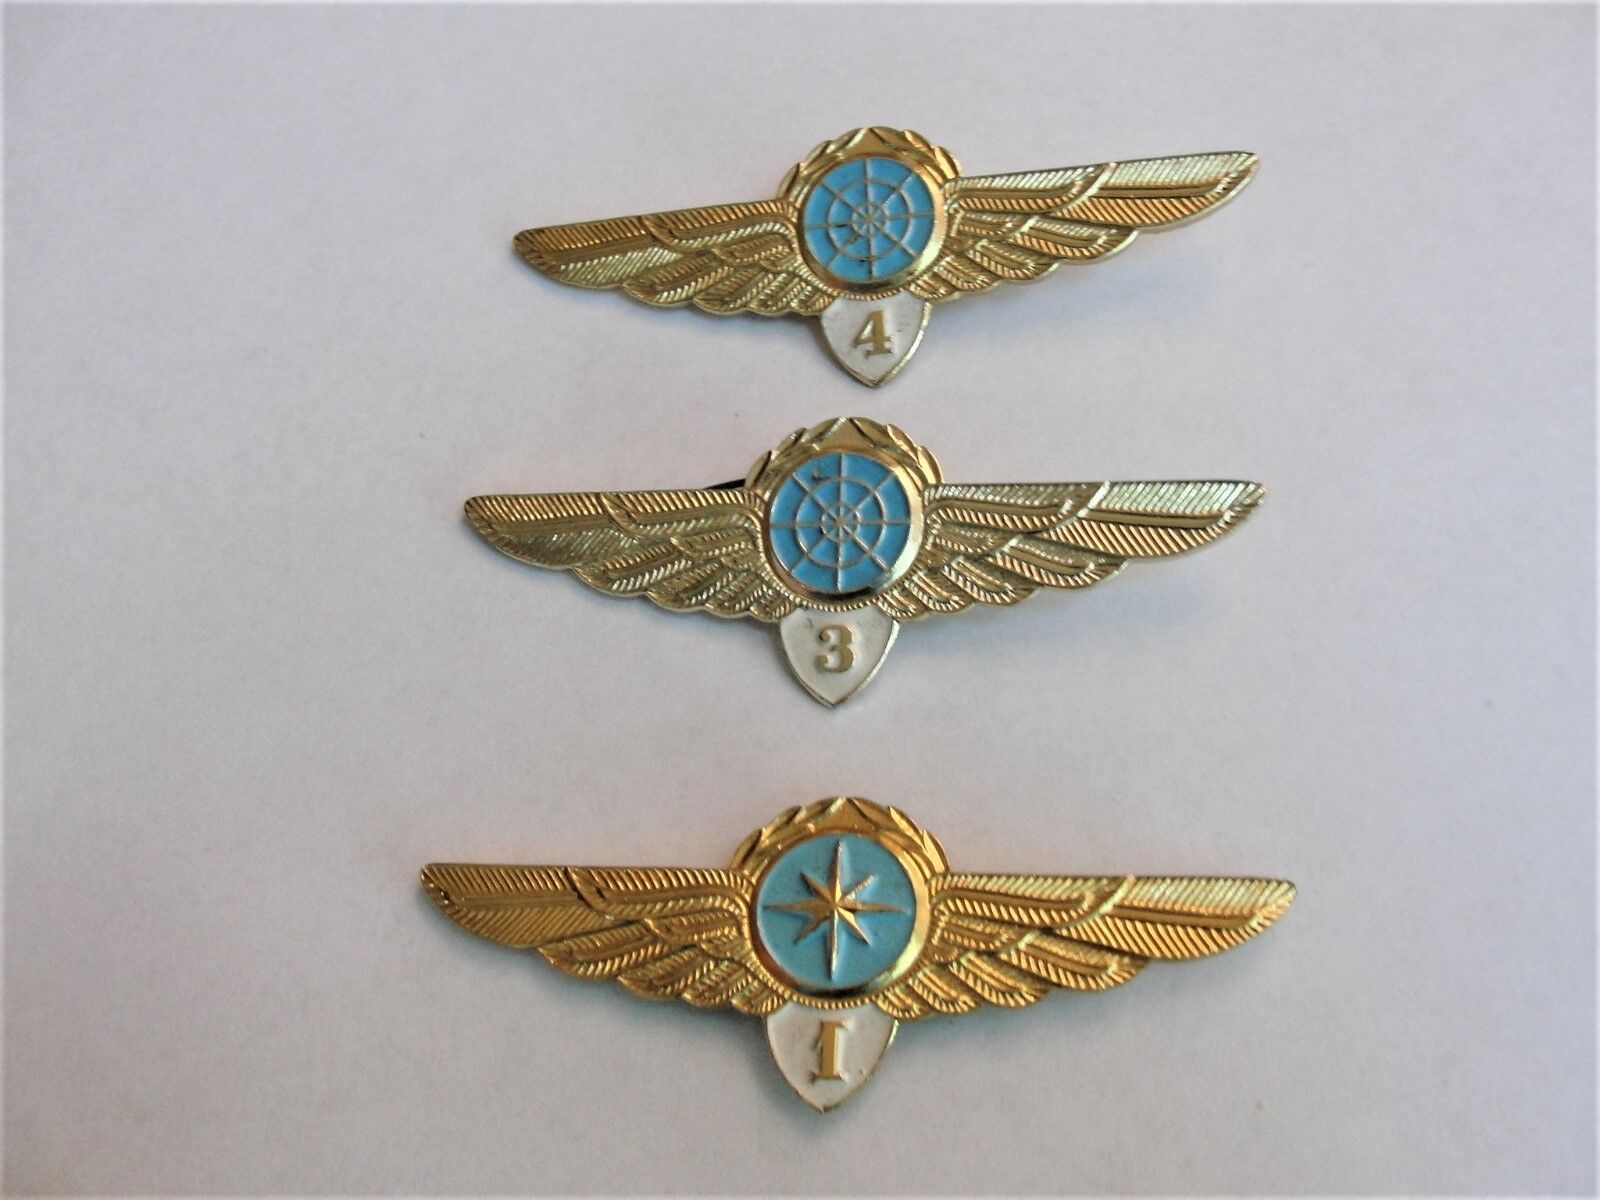 Set of (3)  Air Force 1st, 3rd, 4th Air Force Wings Gold Tone PINS.